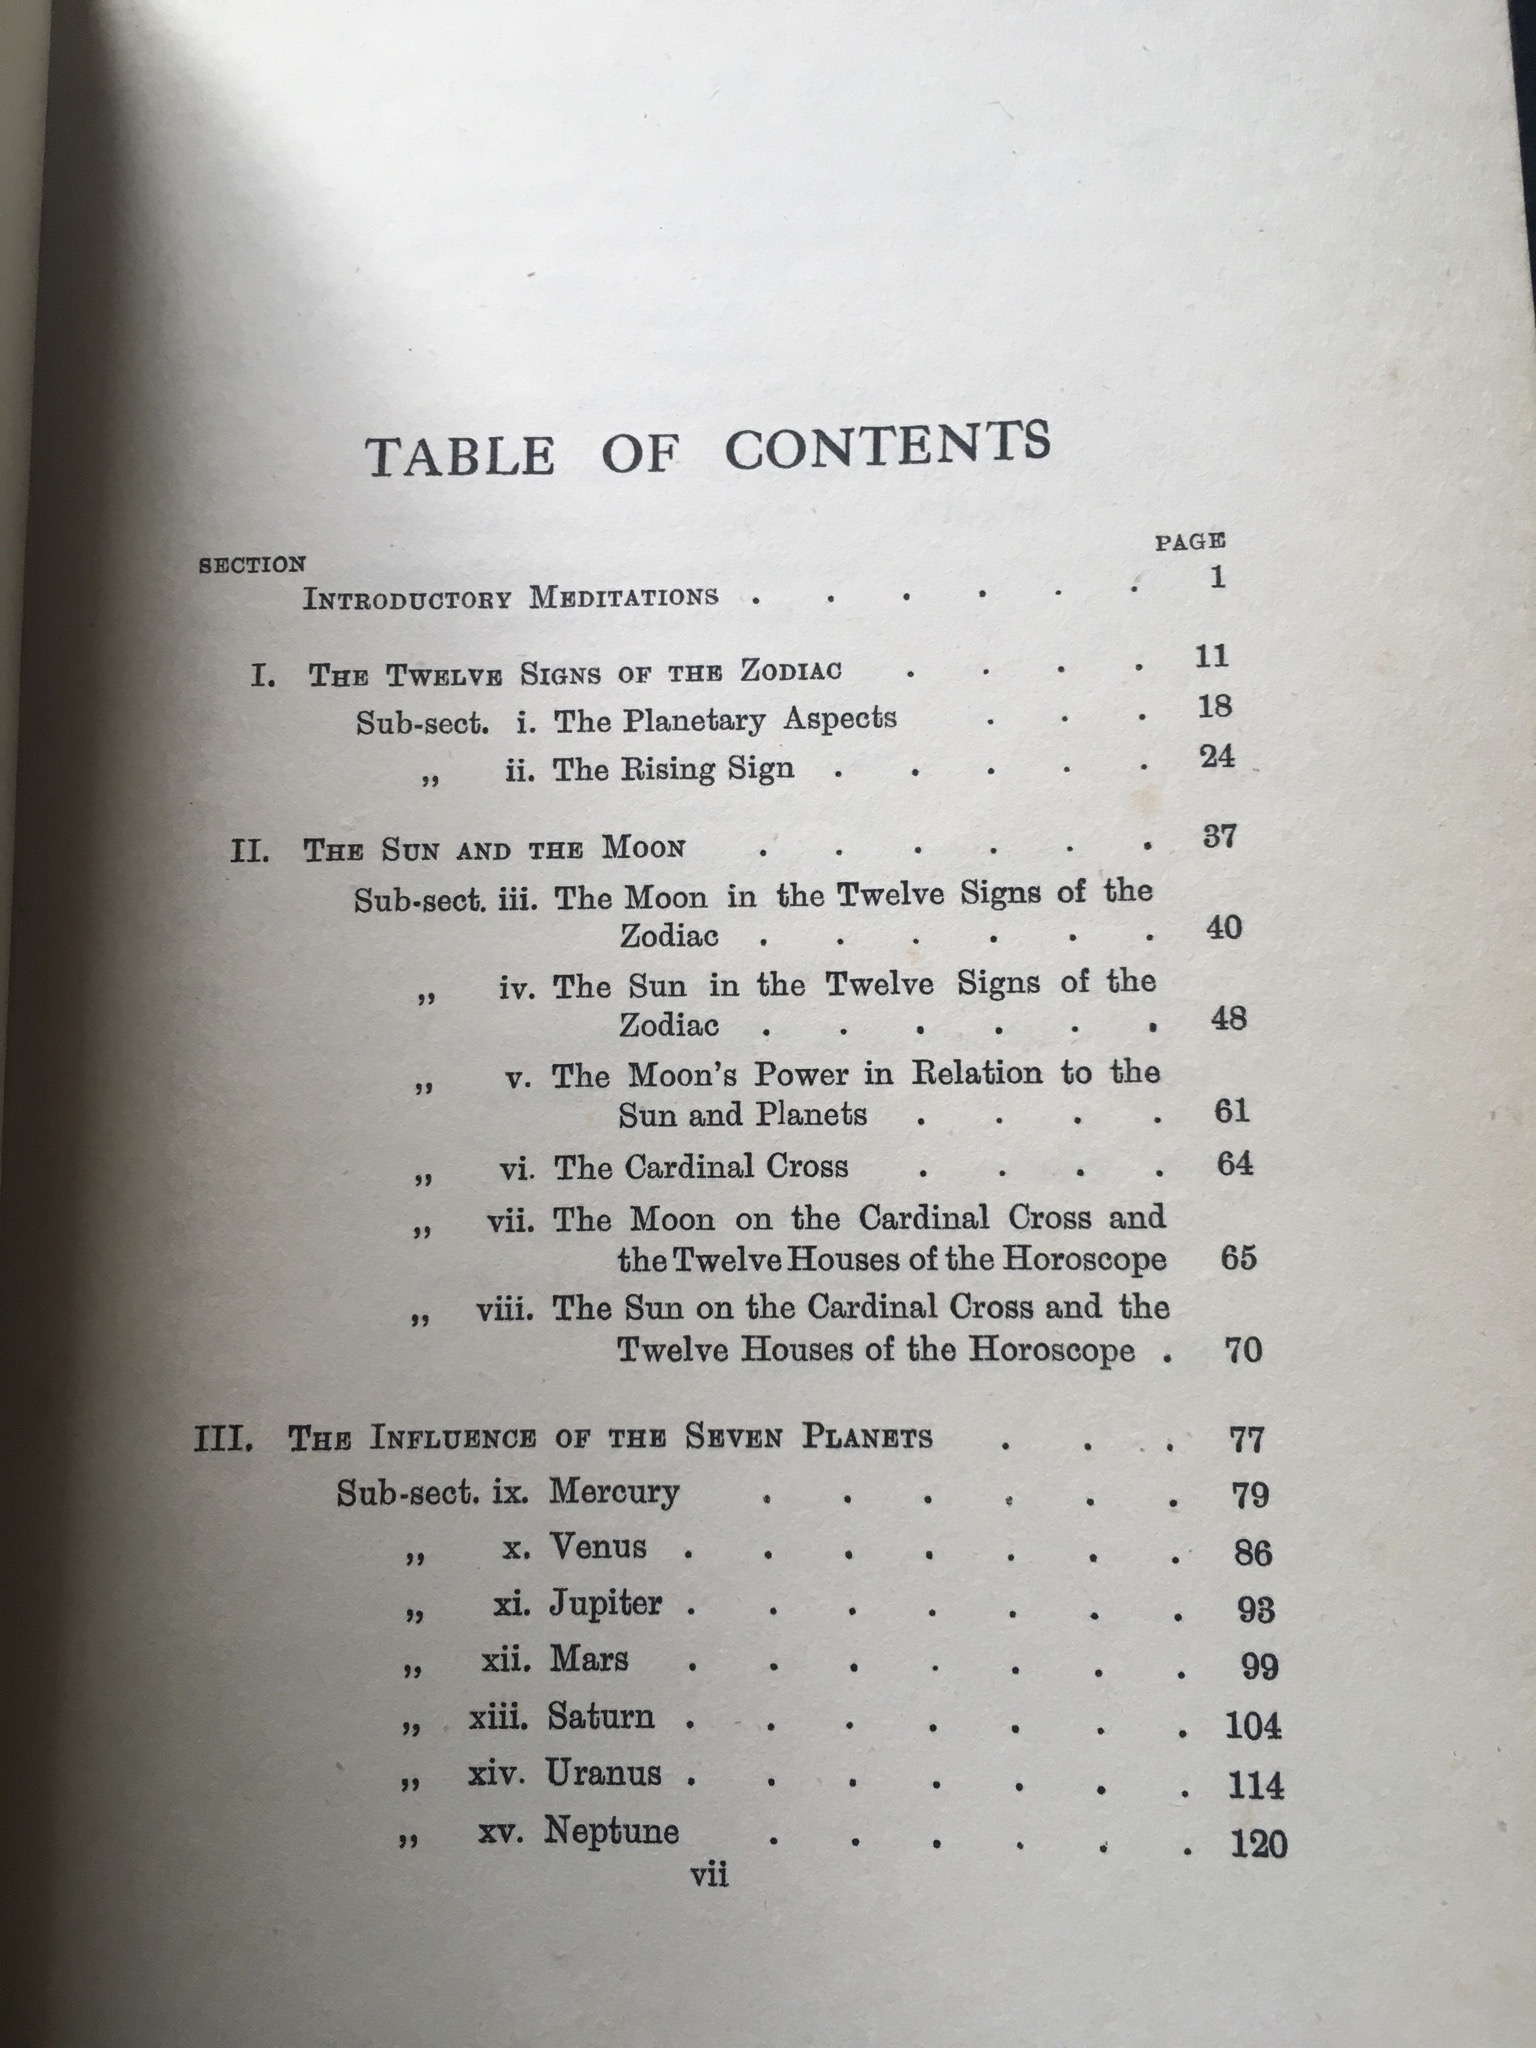 The Field of Occult Chemistry by E. Lester Smith and V. Wallace Slater